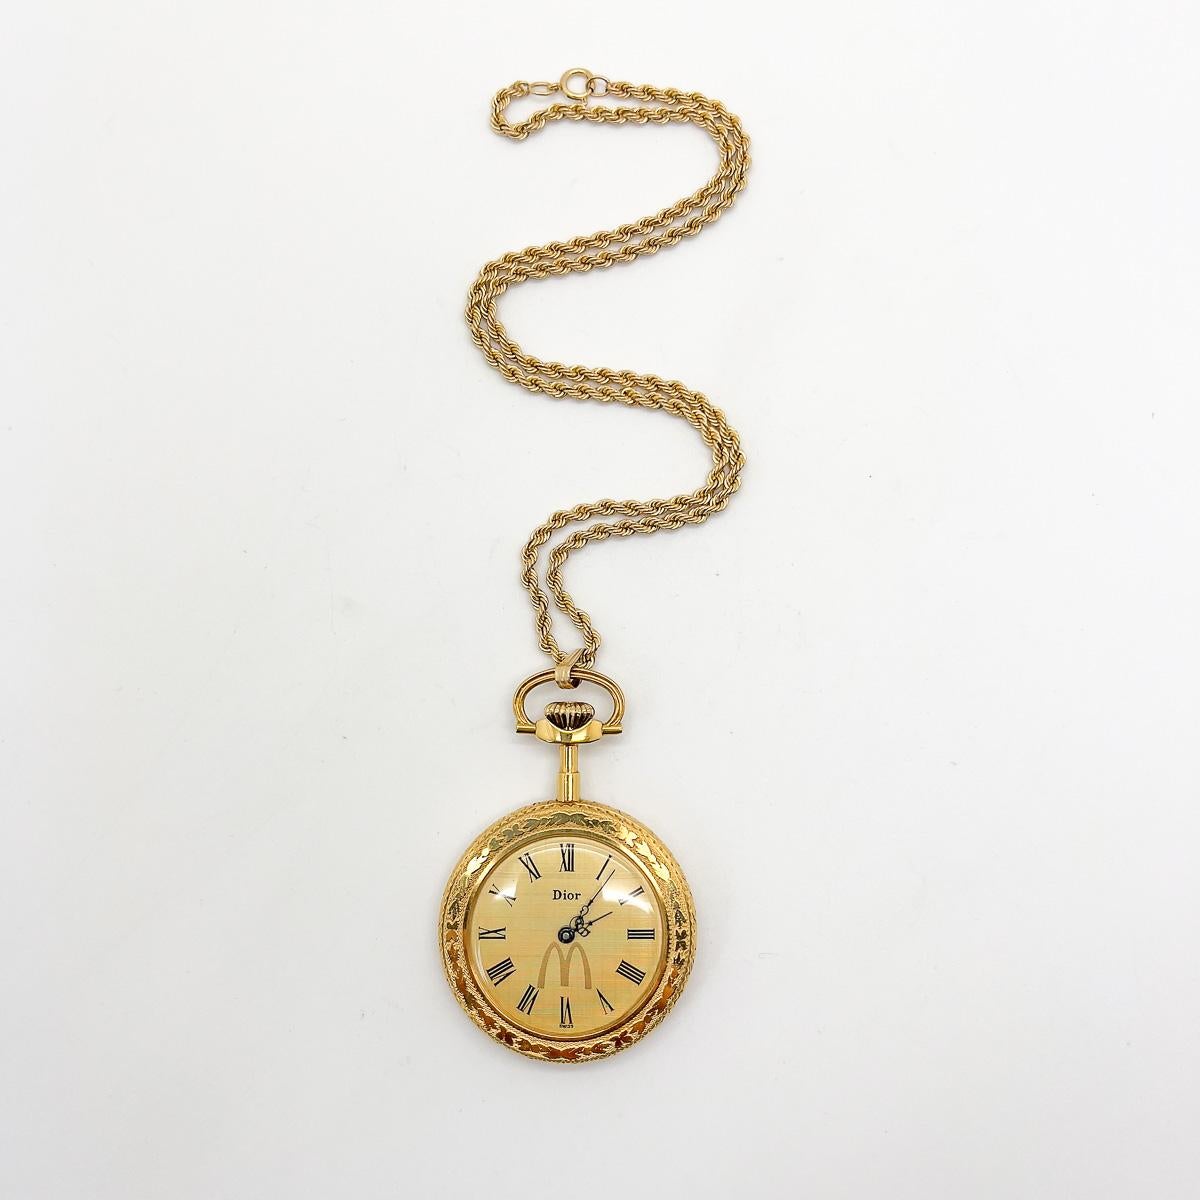 Vintage Christian Dior  Pendant Watch Necklace 1980s In Good Condition For Sale In Wilmslow, GB